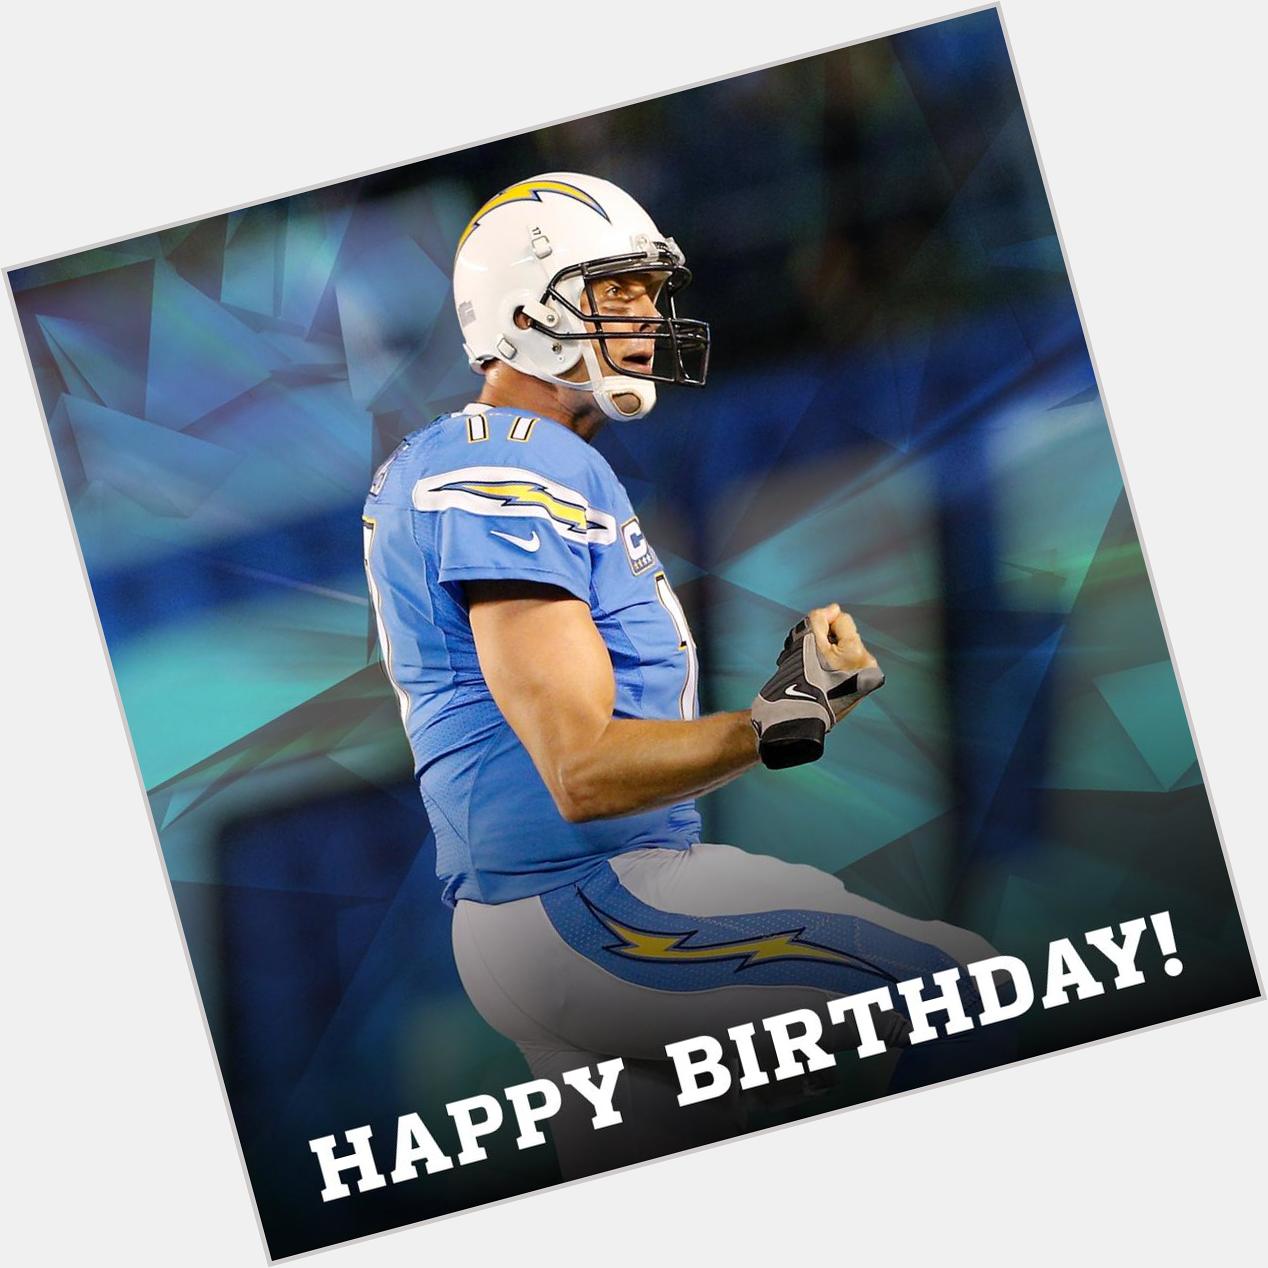  Rivers. Happy Birthday to the best current QB to never win a Super Bowl.  